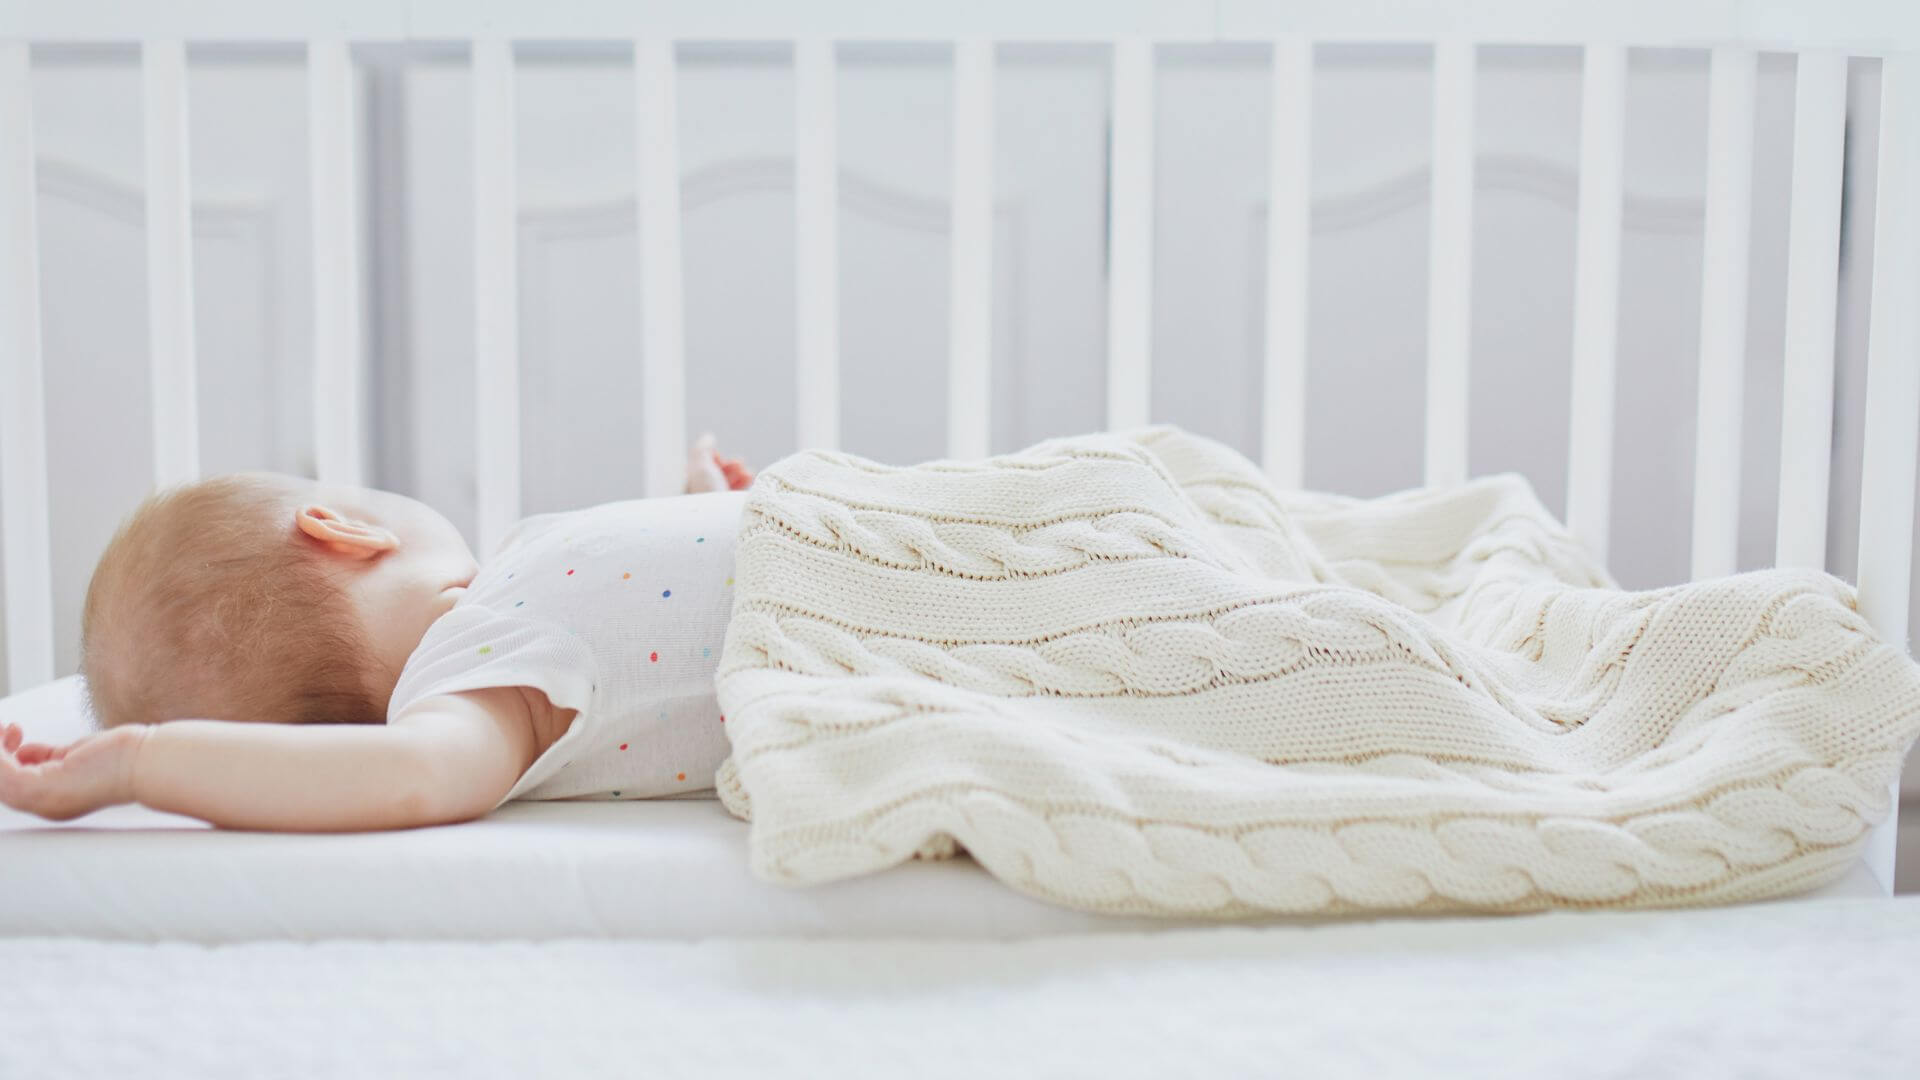 The Advantage of Co-Sleeping with Baby